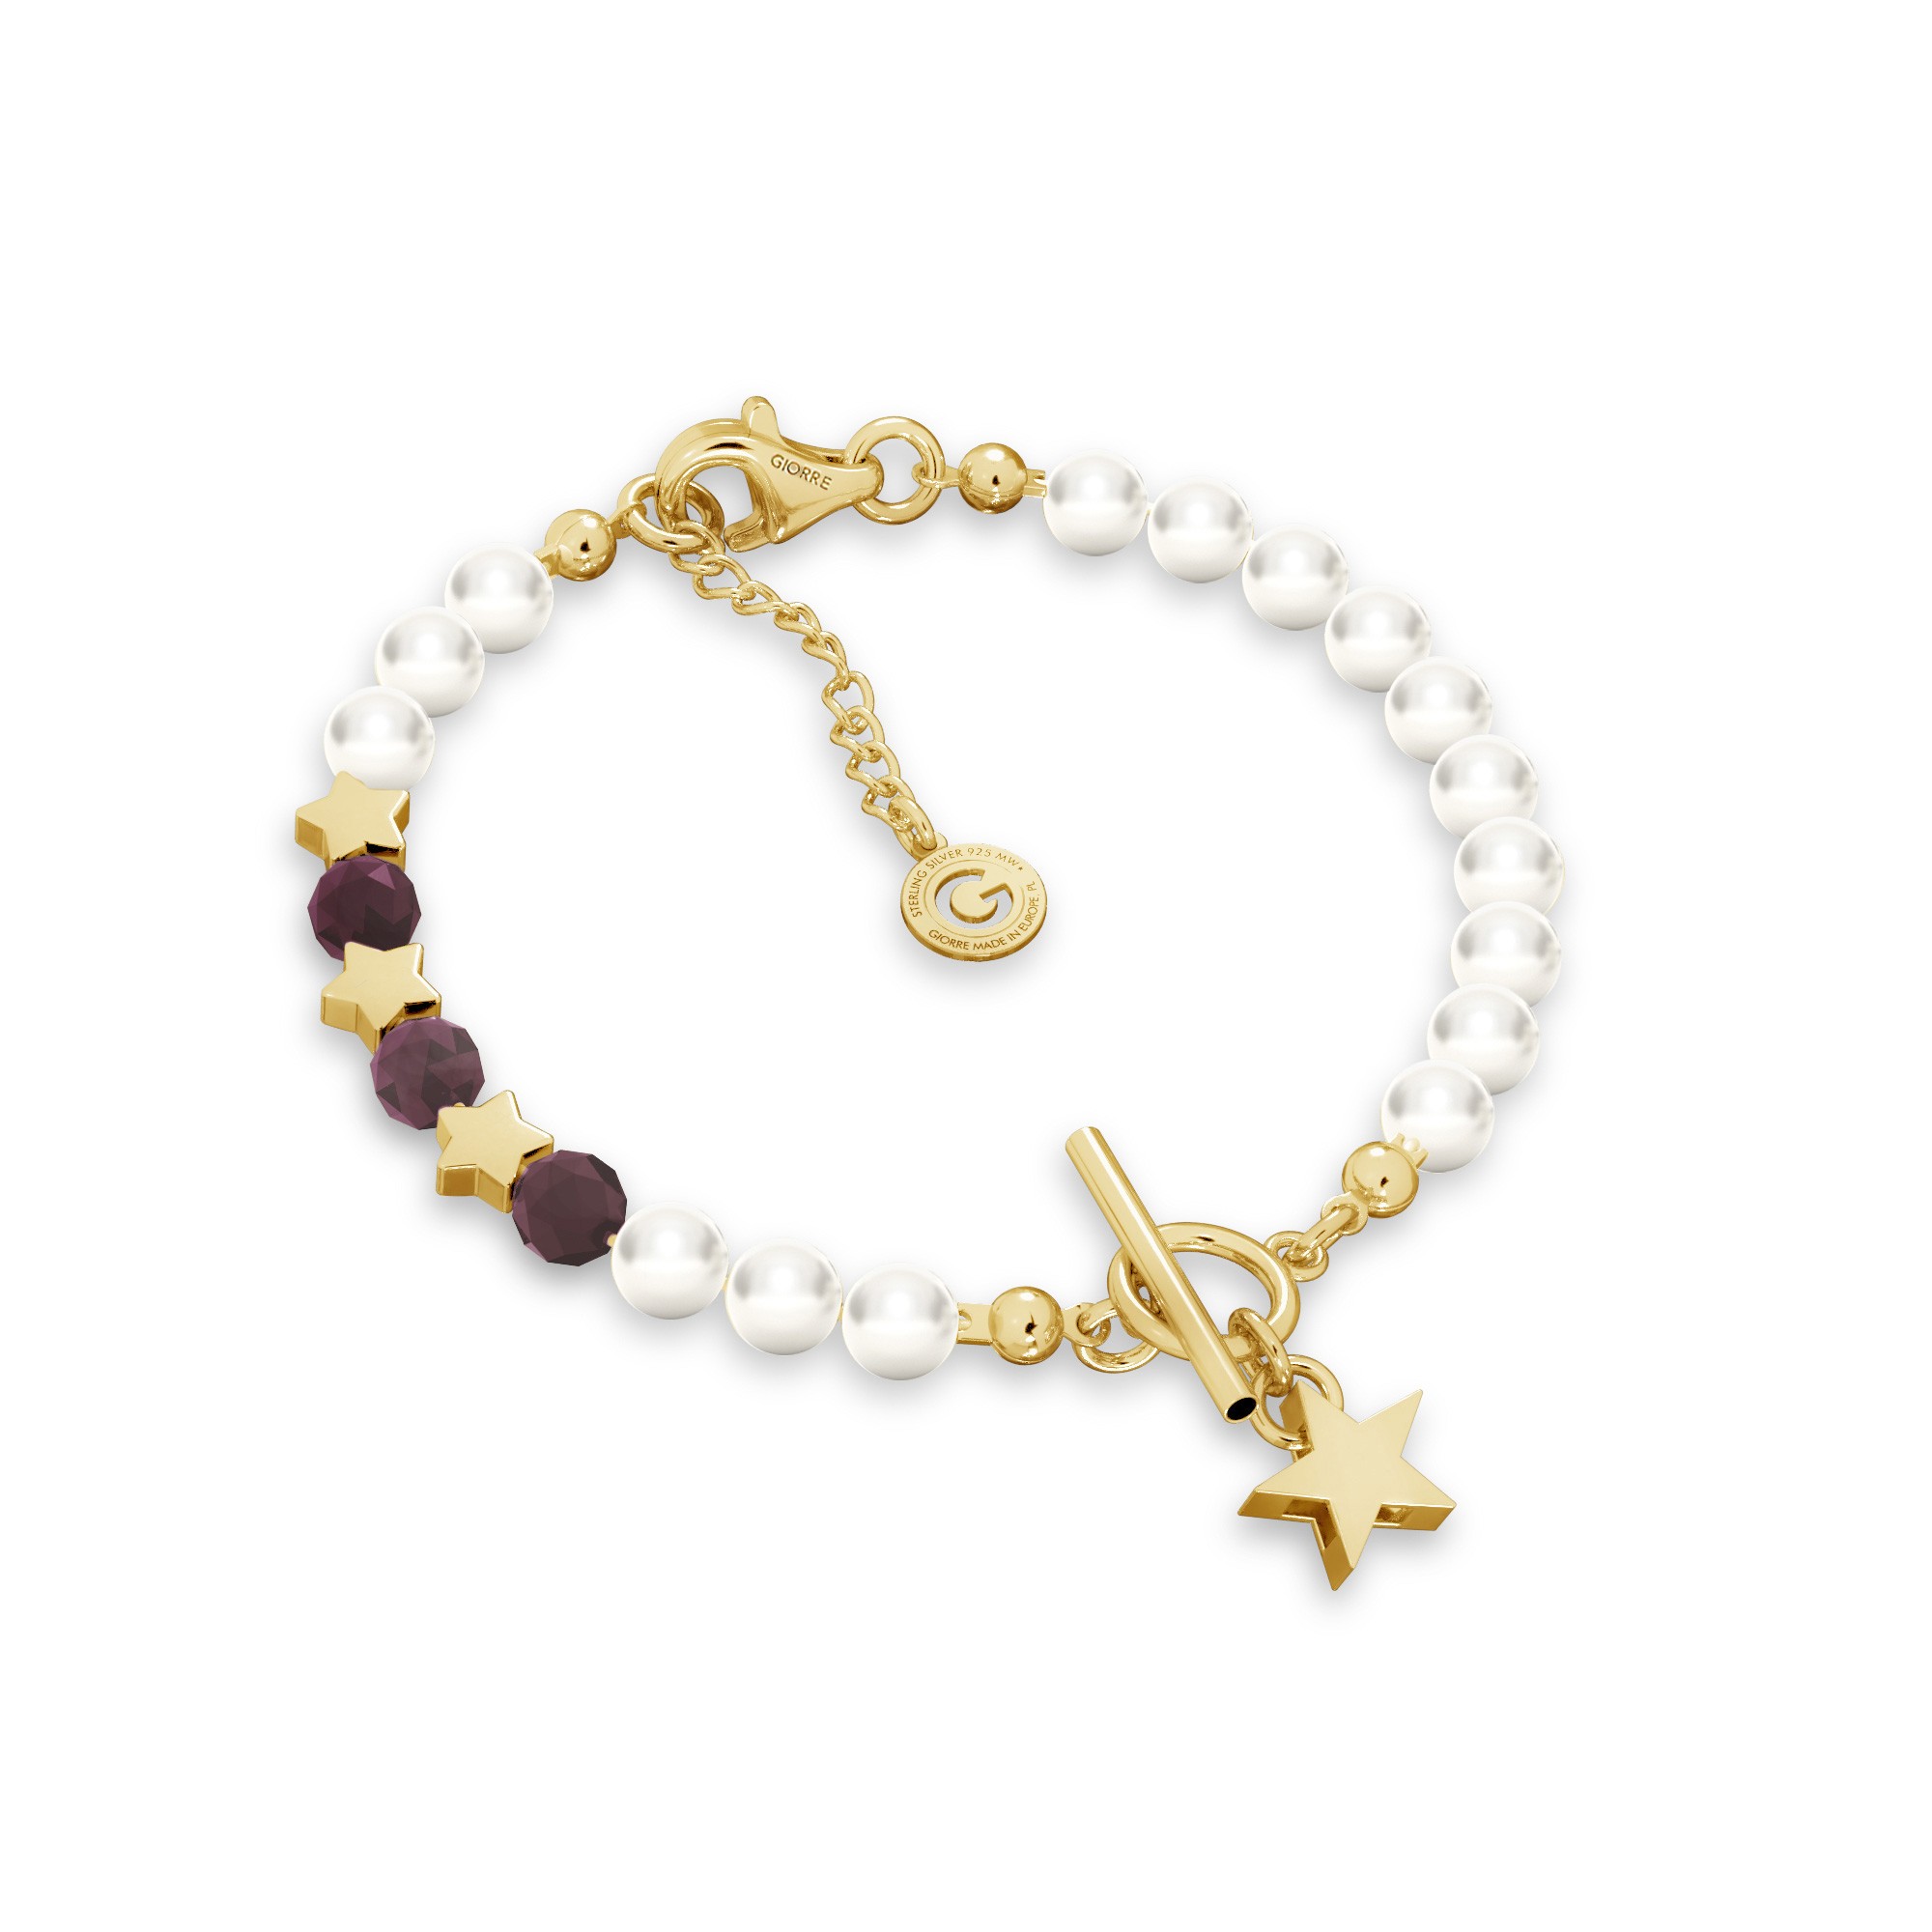 Ruby pearl bracelet with stars, sterling silver 925